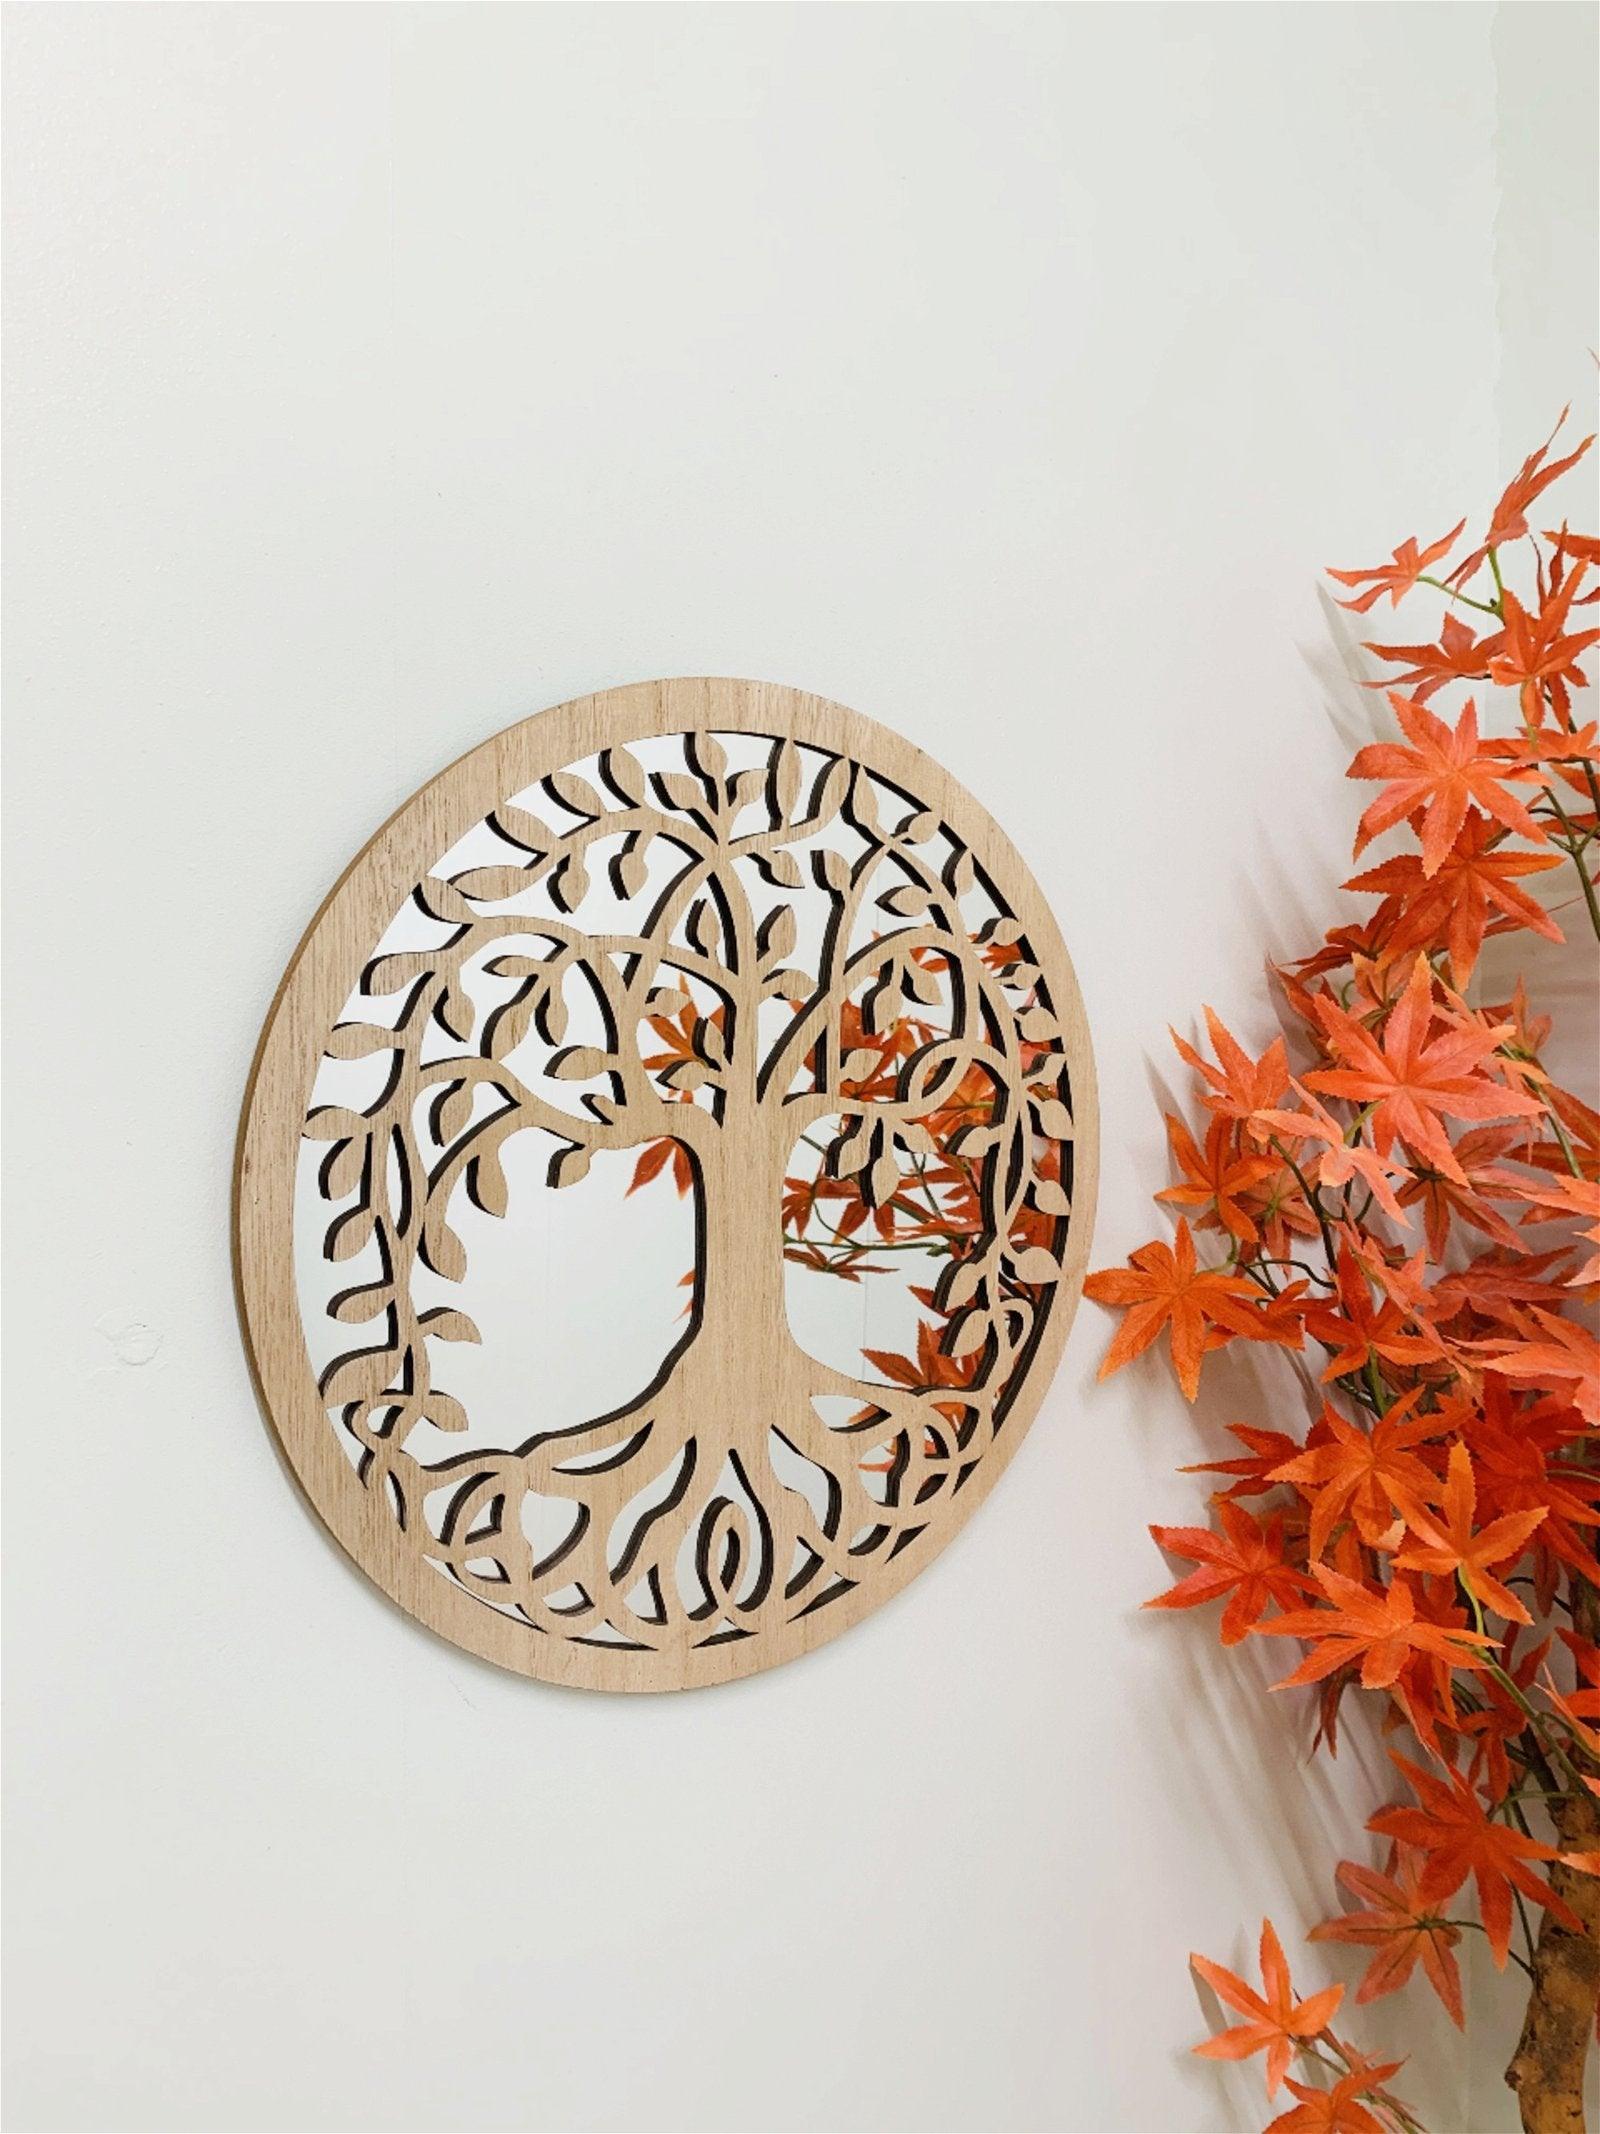 View Round Cut Out Tree Of Life Mirror 35cm information